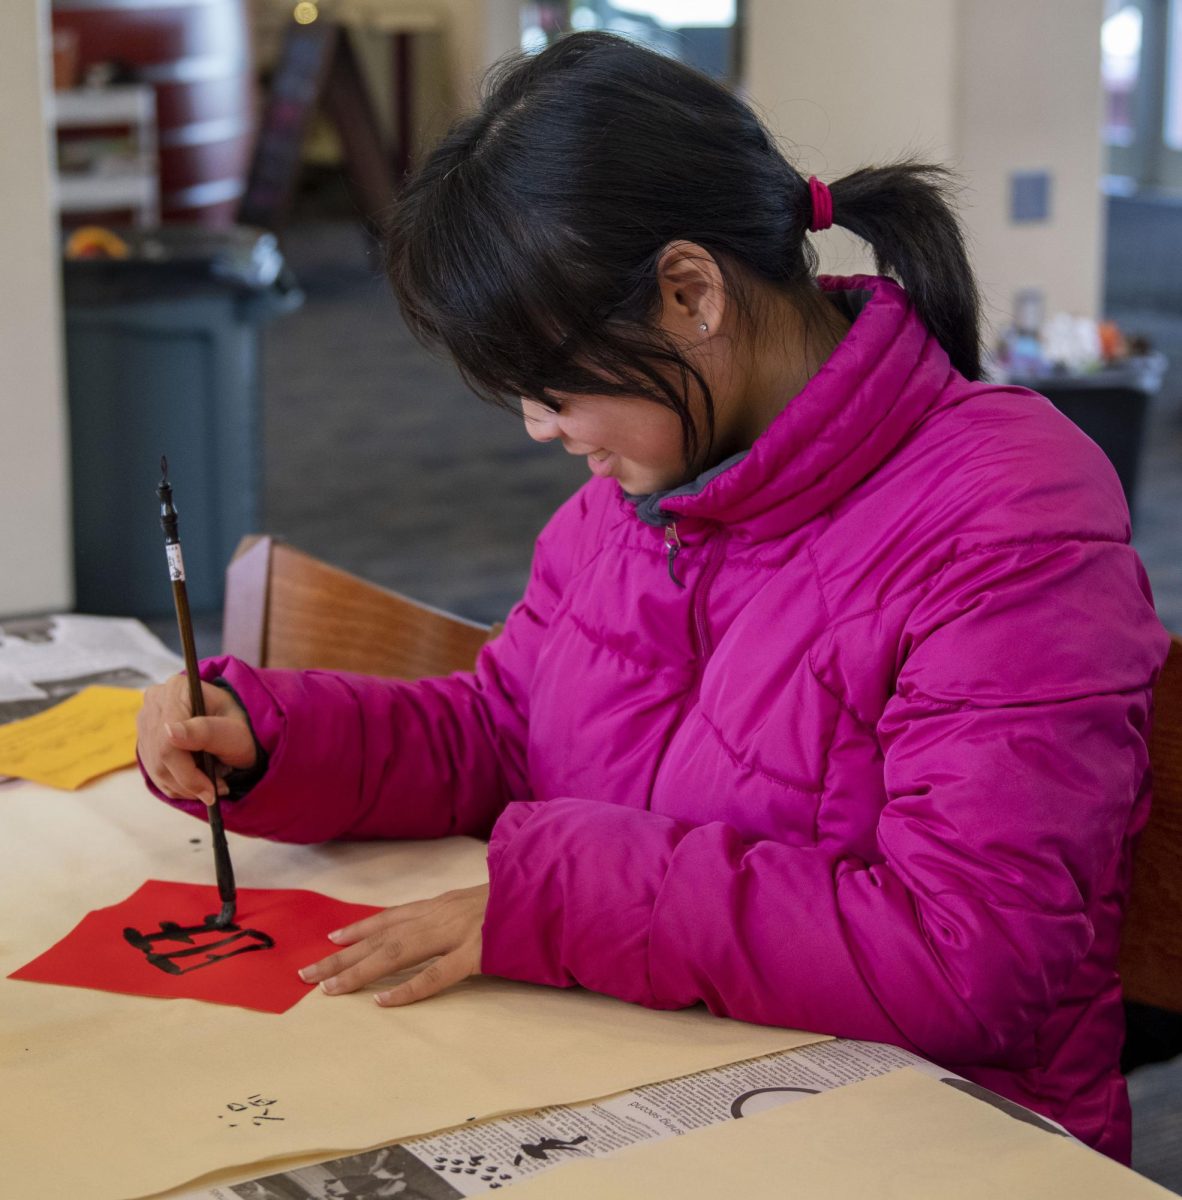 Audrey McFadden practices calligraphy by painting Chinese characters.